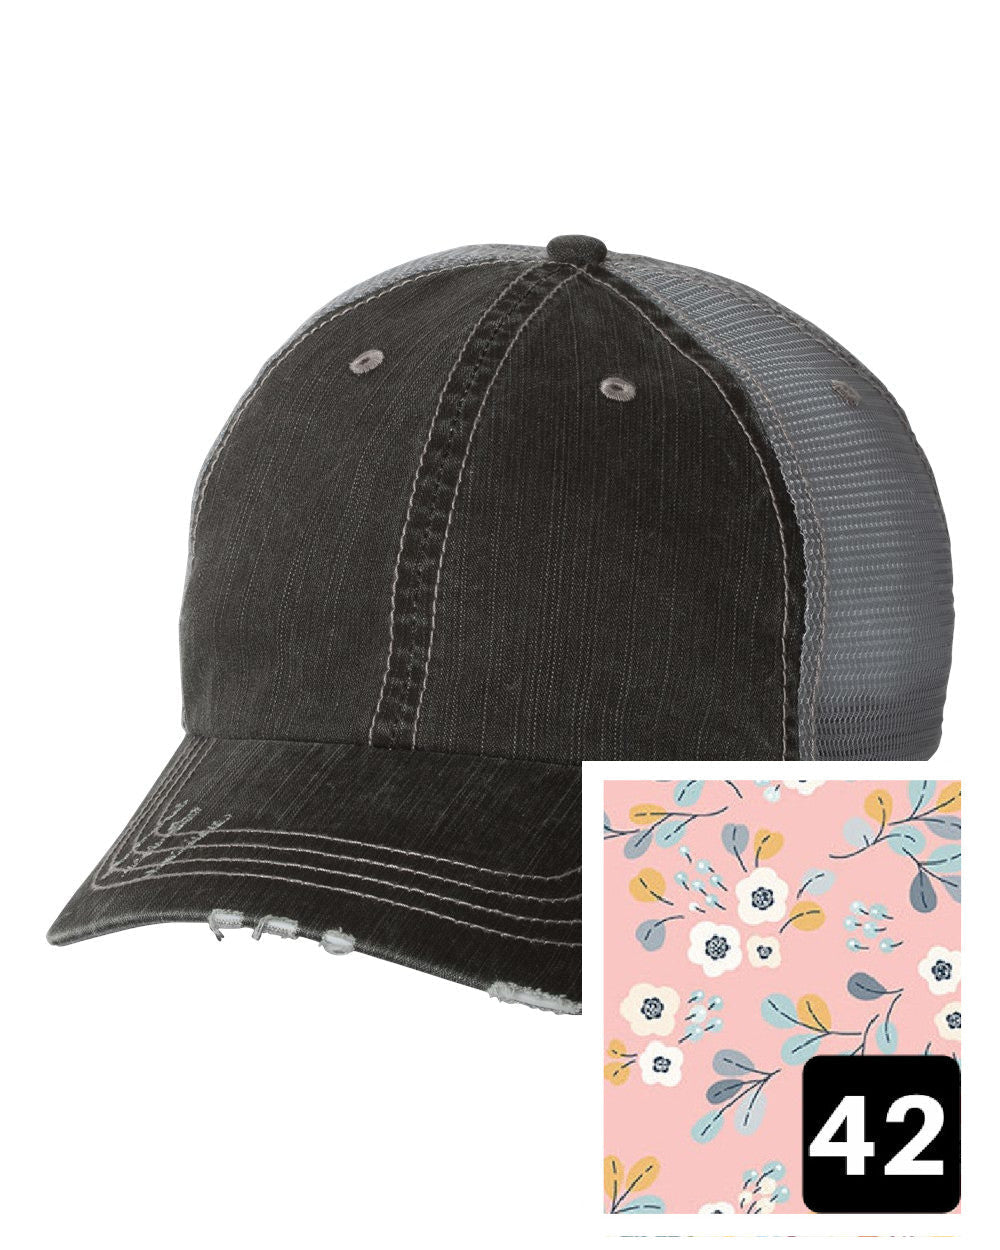 gray distressed trucker hat with light blue and pink mosaic fabric state of Delaware